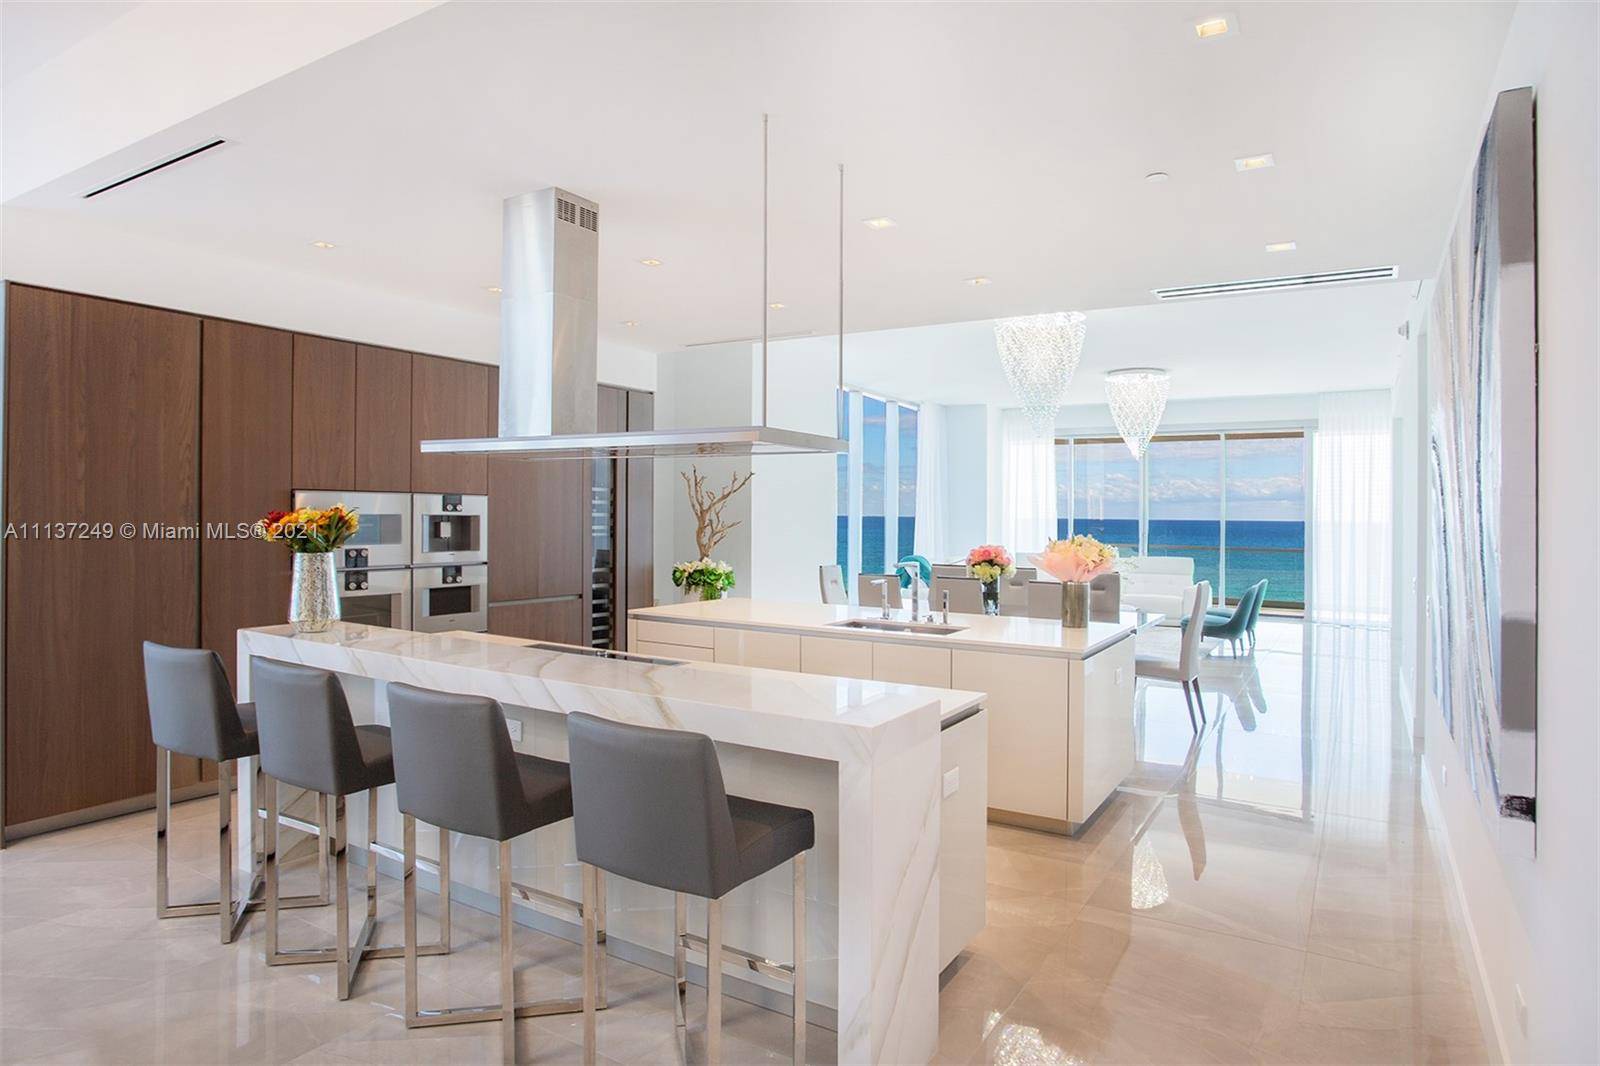 Move beyond ordinary to extraordinary in this ultra luxury oceanfront condo at the Turnberry Ocean Club.